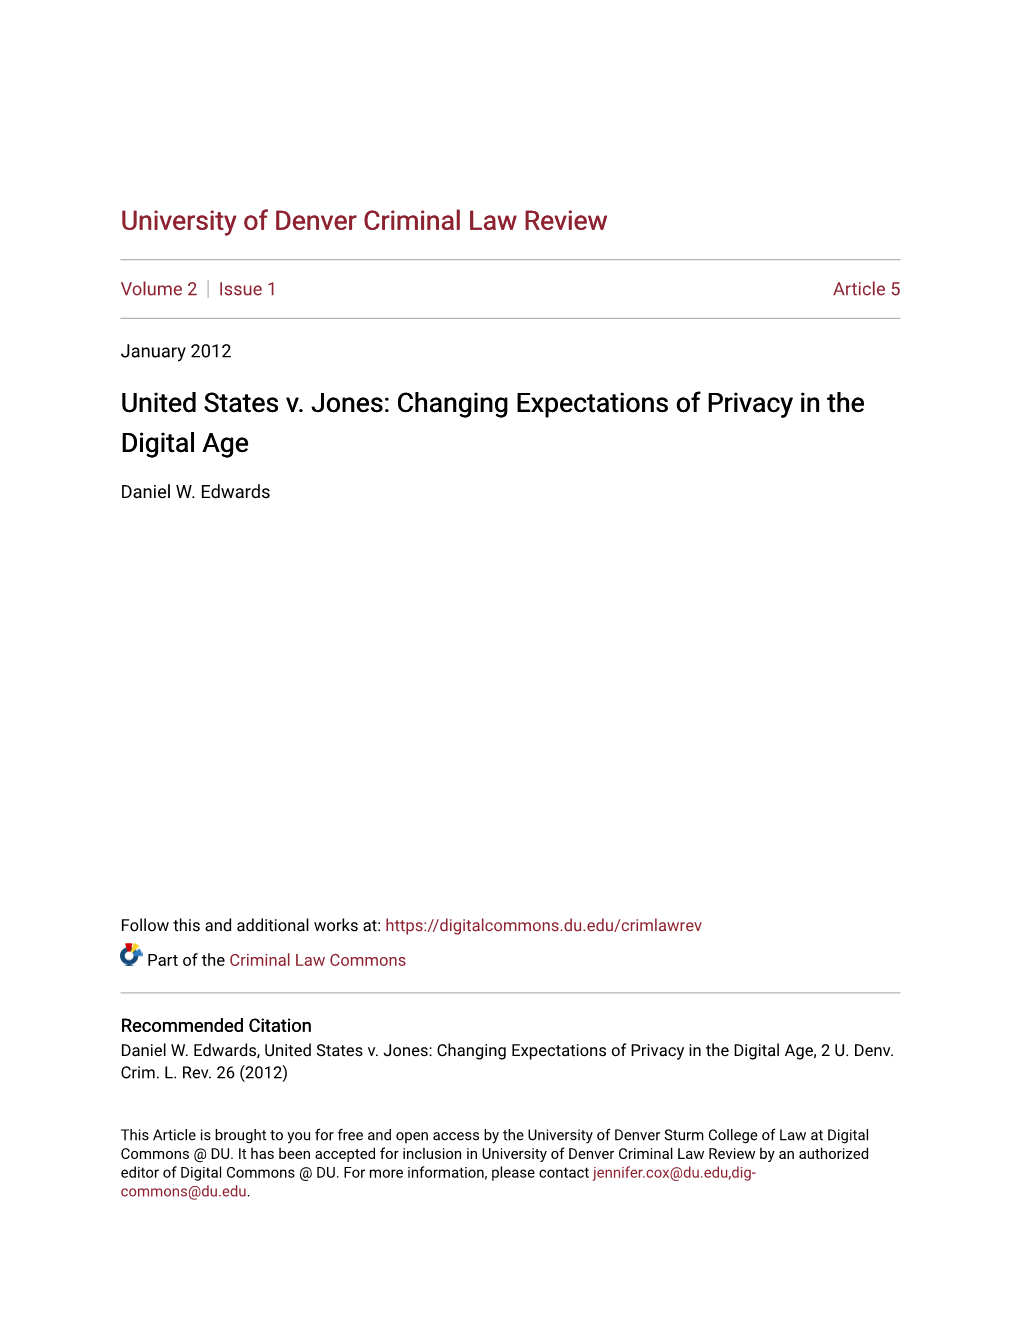 United States V. Jones: Changing Expectations of Privacy in the Digital Age